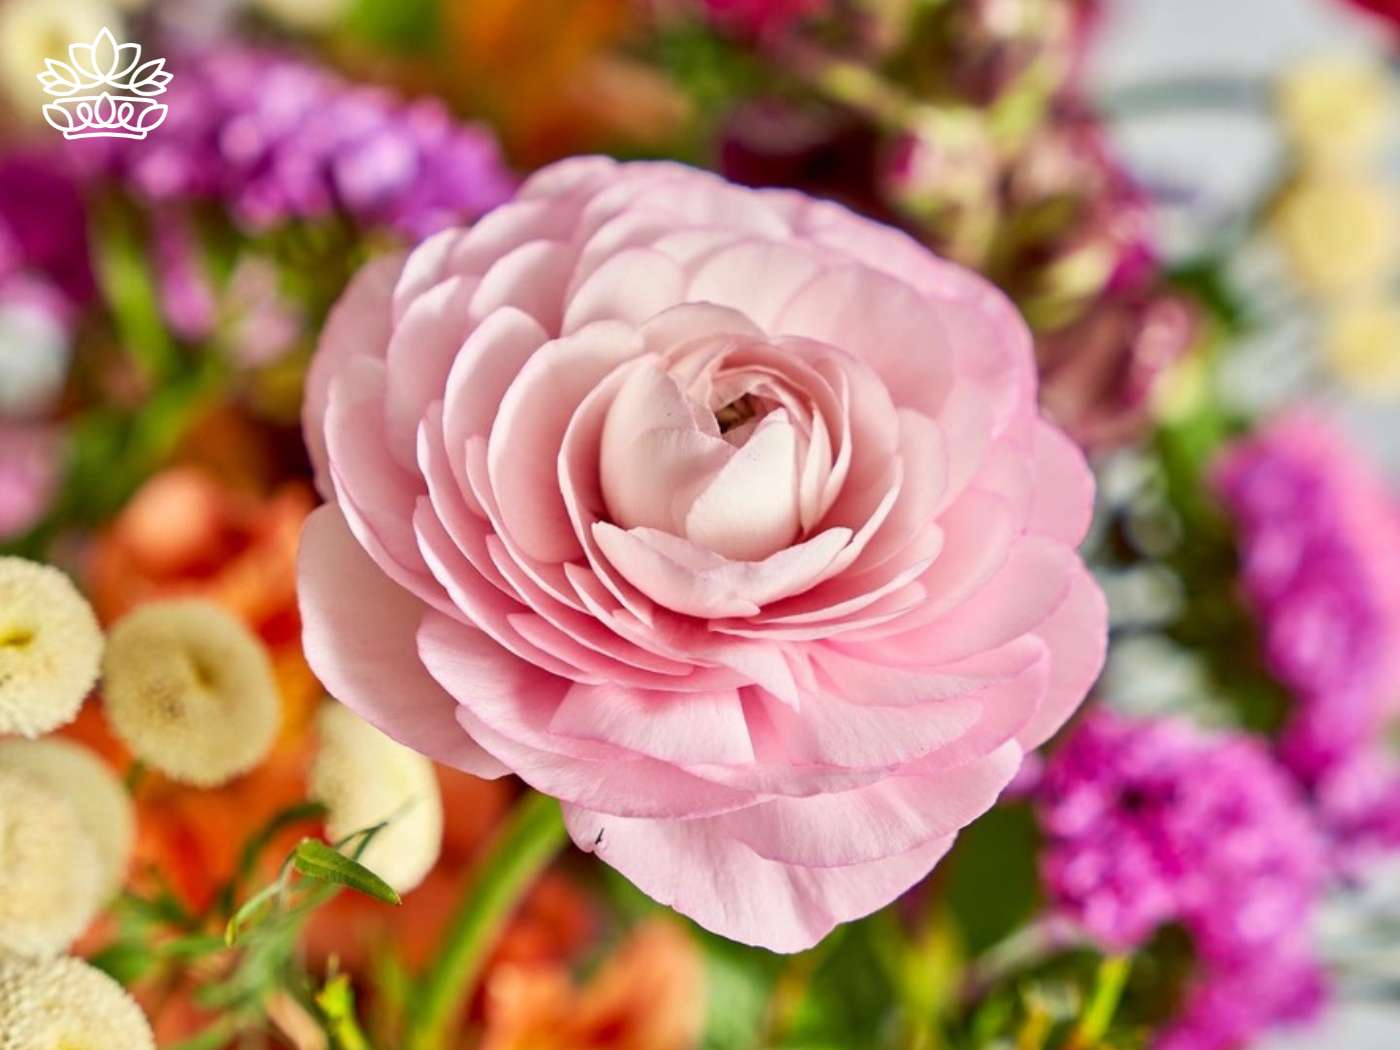 A delicate pink ranunculus blossom in full bloom, standing out against a vivid background of assorted flowers, from Fabulous Flowers and Gifts.